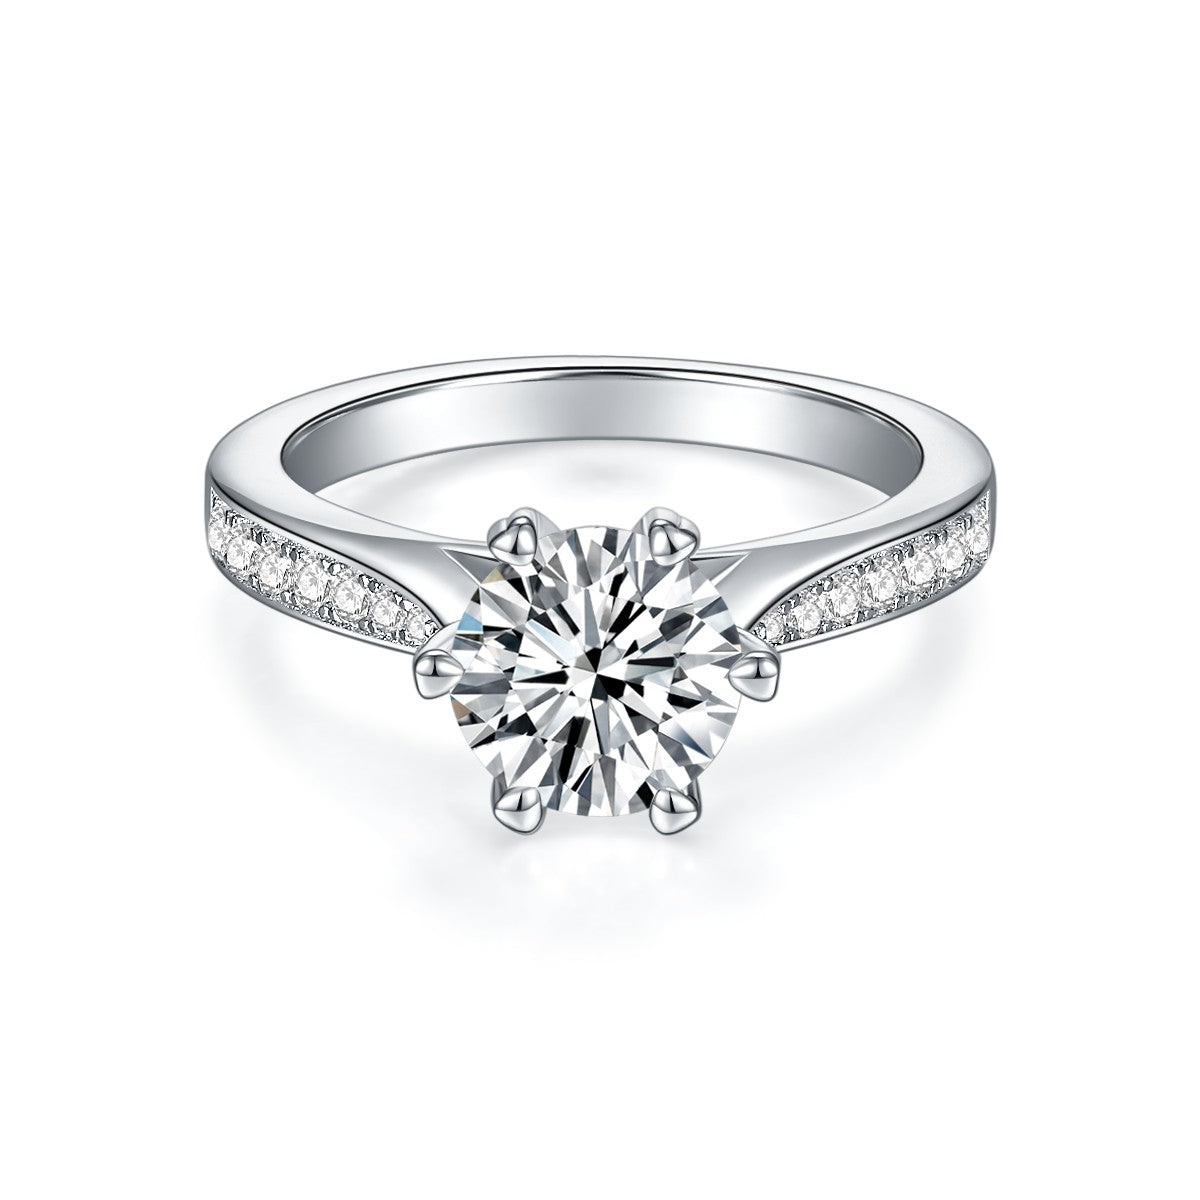 【02LIVE # link 10 - BUY 1 GET 1 free ring】 S925 Silver Moissanite Diamond A change of fortune Rings 1/5Carat  RM1041